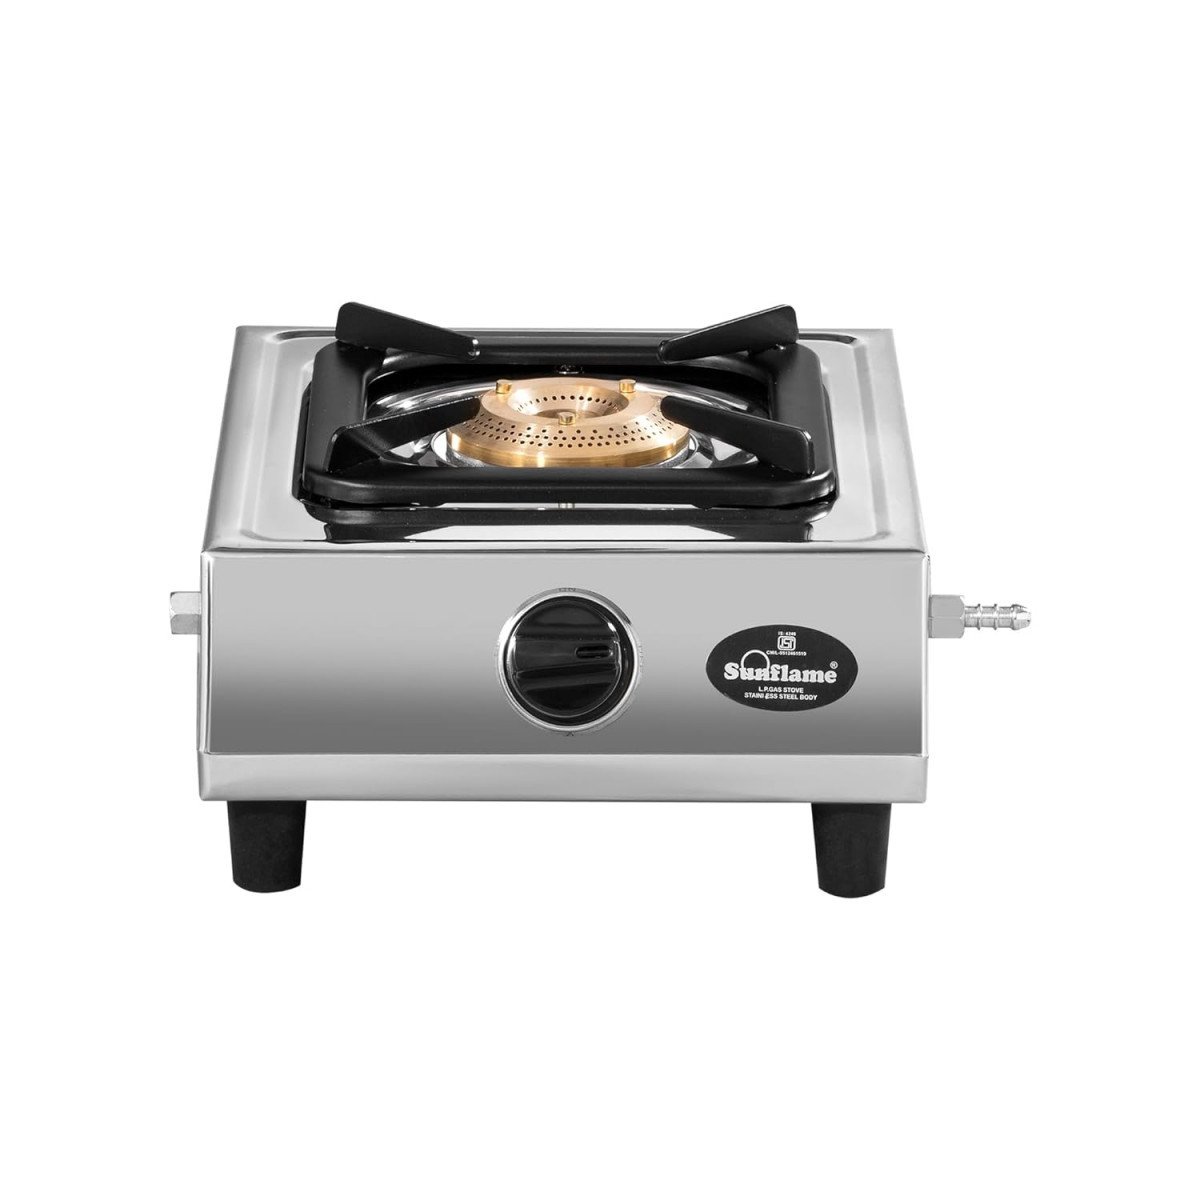 SUNFLAME Single Burner Stainless Steel Open Gas Stove1 Jumbo Brass Burner2-Years Product CoverageStainless Steel BodyHeat Resistant Ergonomic KnobsHeavy Duty Pan SupportPan India Presence